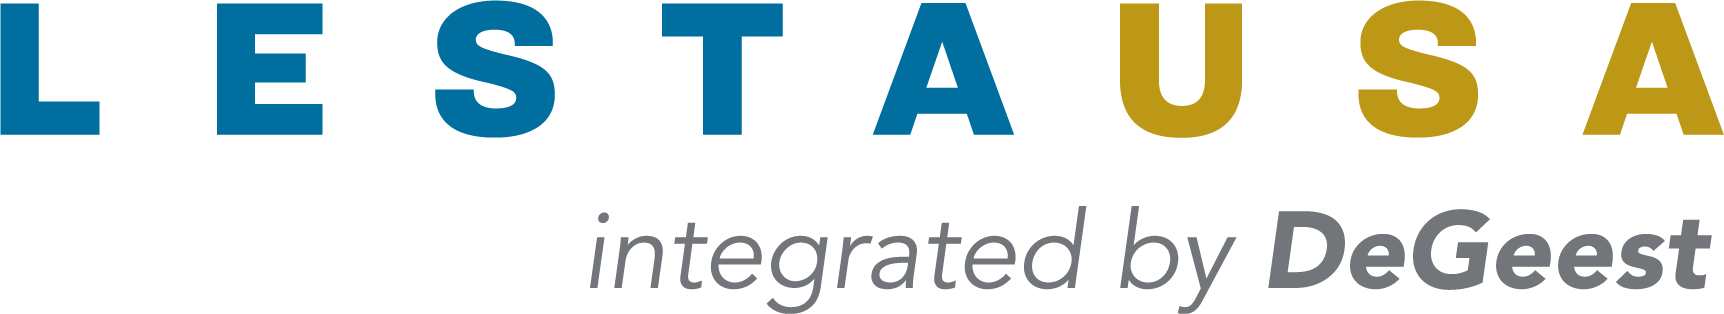 LESTAUSA Integrated by DeGeest Tagline